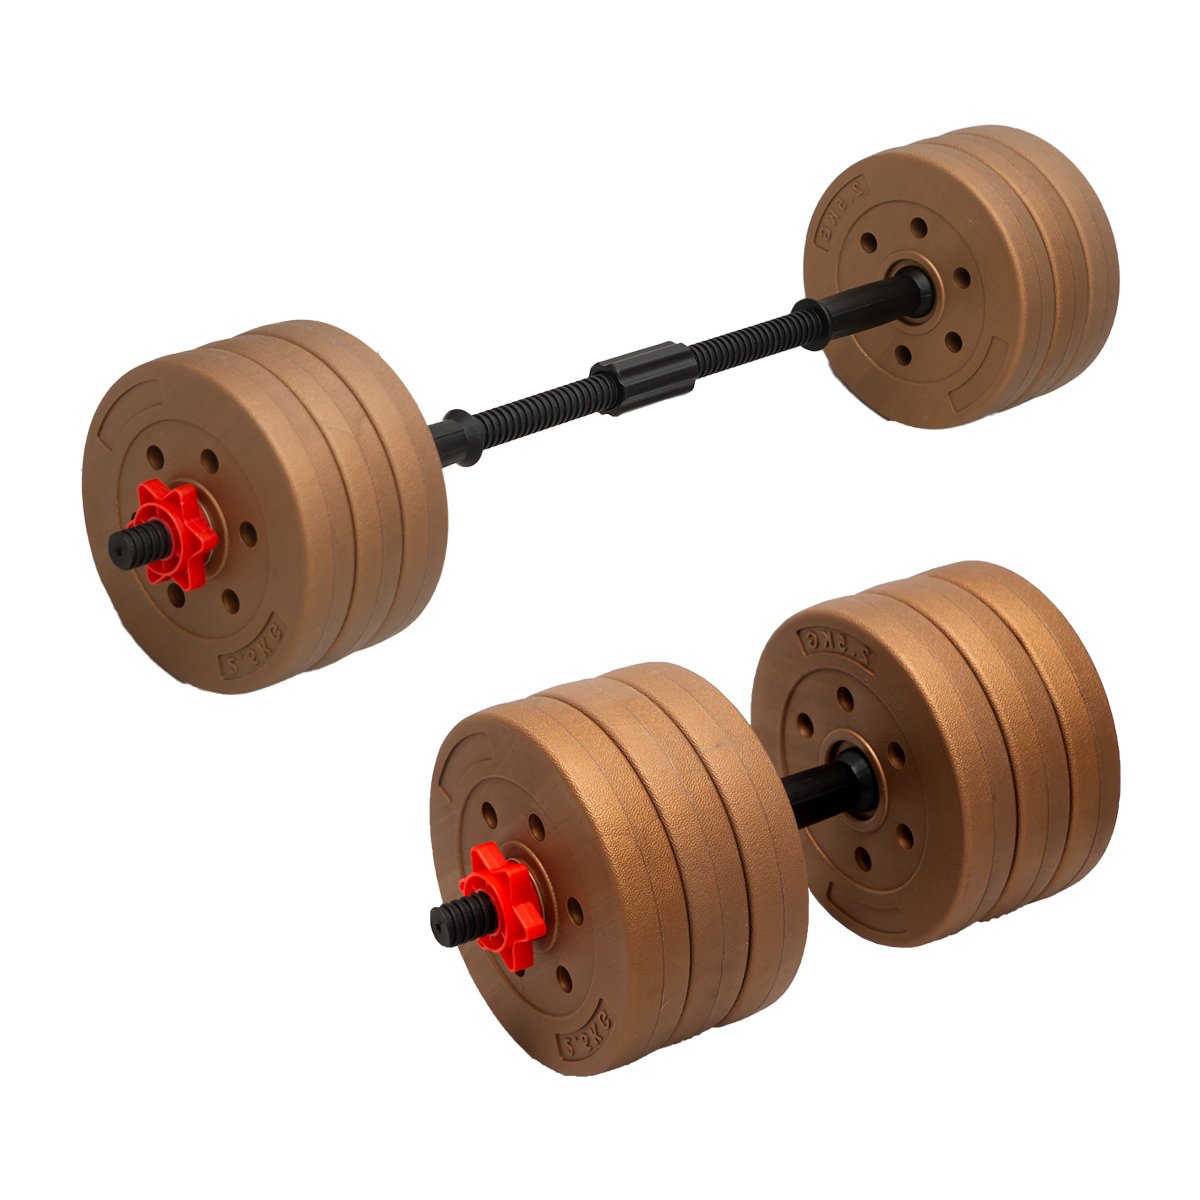 Powertrain Adjustable 32kg Home Gym Dumbbell Barbell Weights Gold 1